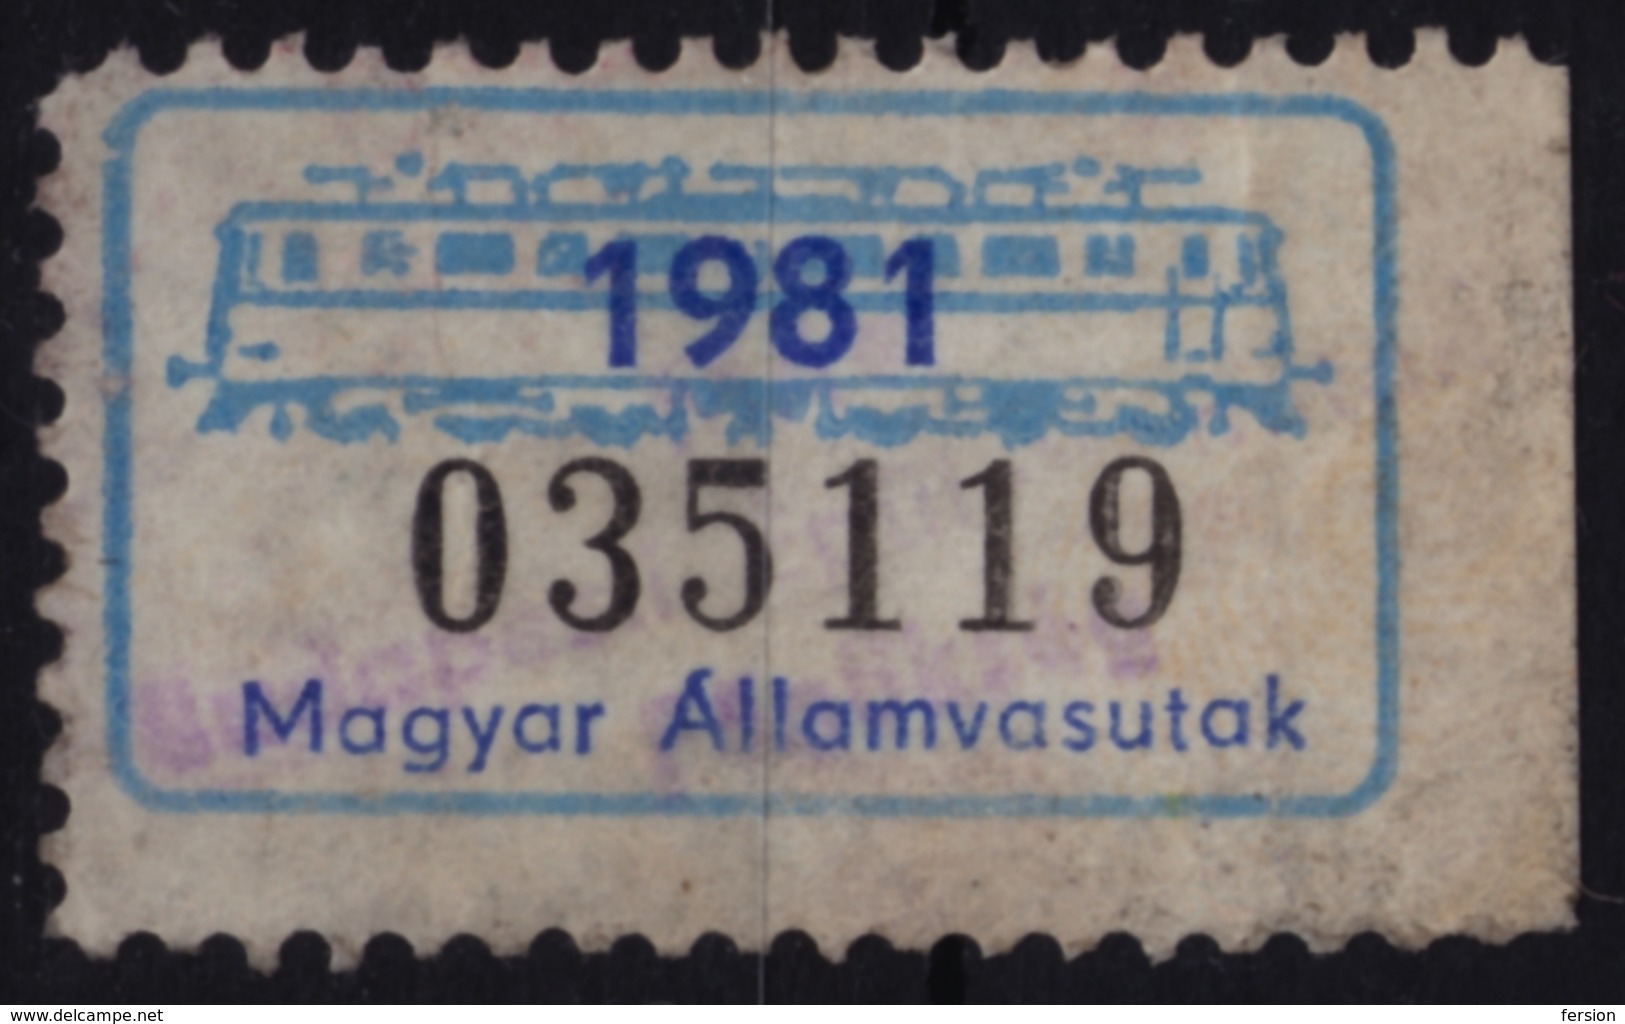 Train Railway Rail PASS Locomotive TICKET STAMP Railway Workers And Family TAX Label Vignette Revenue STAMP 1981 HUNGARY - Trains